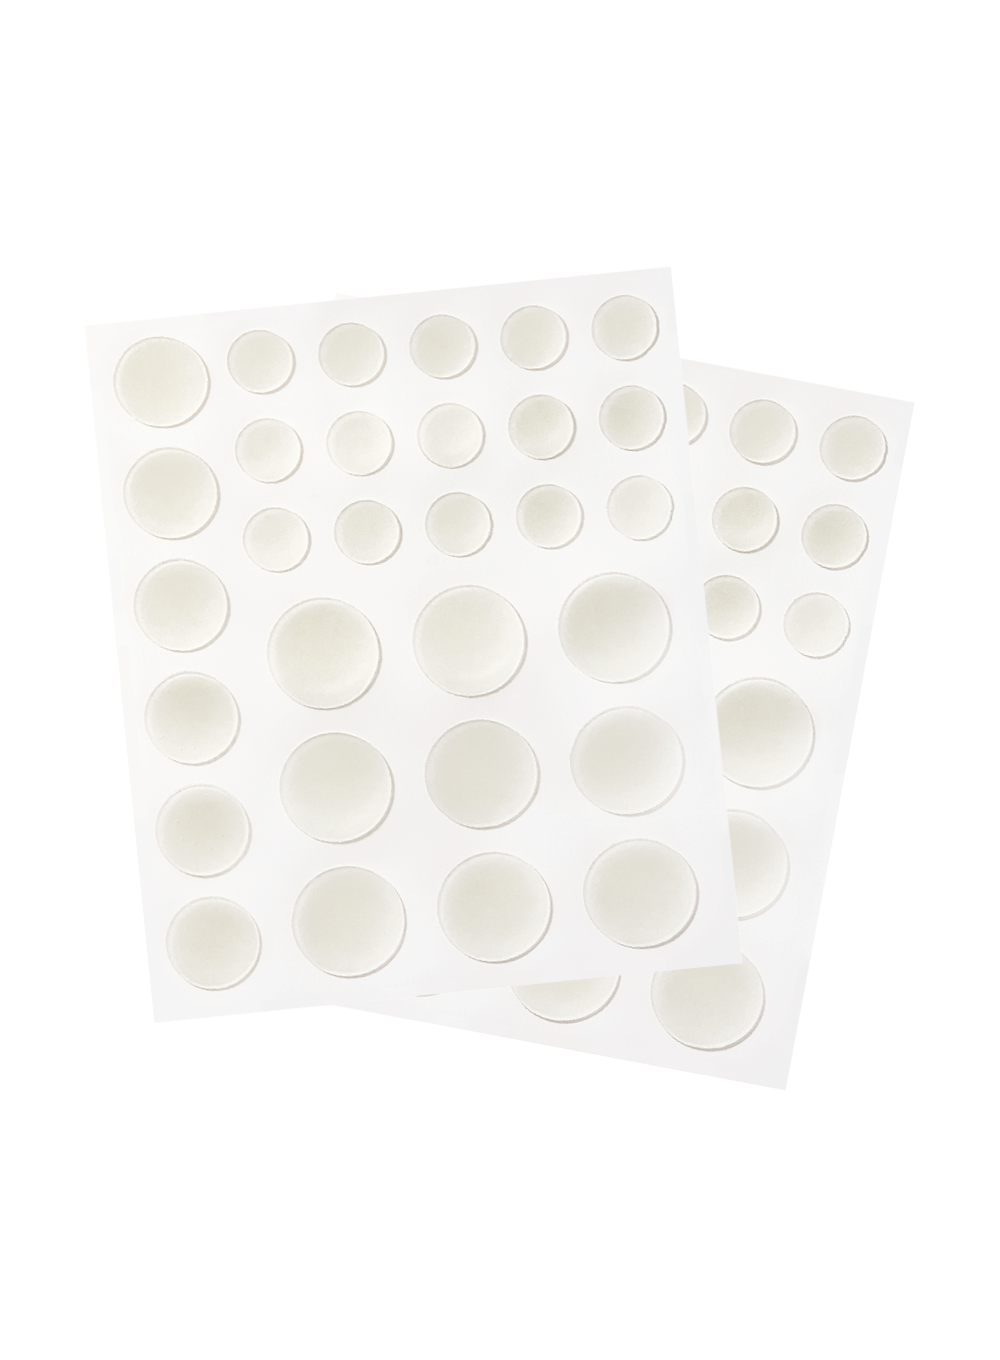 Peach Slices Acne Spot Dots - 60 Patches | Peach & Lily